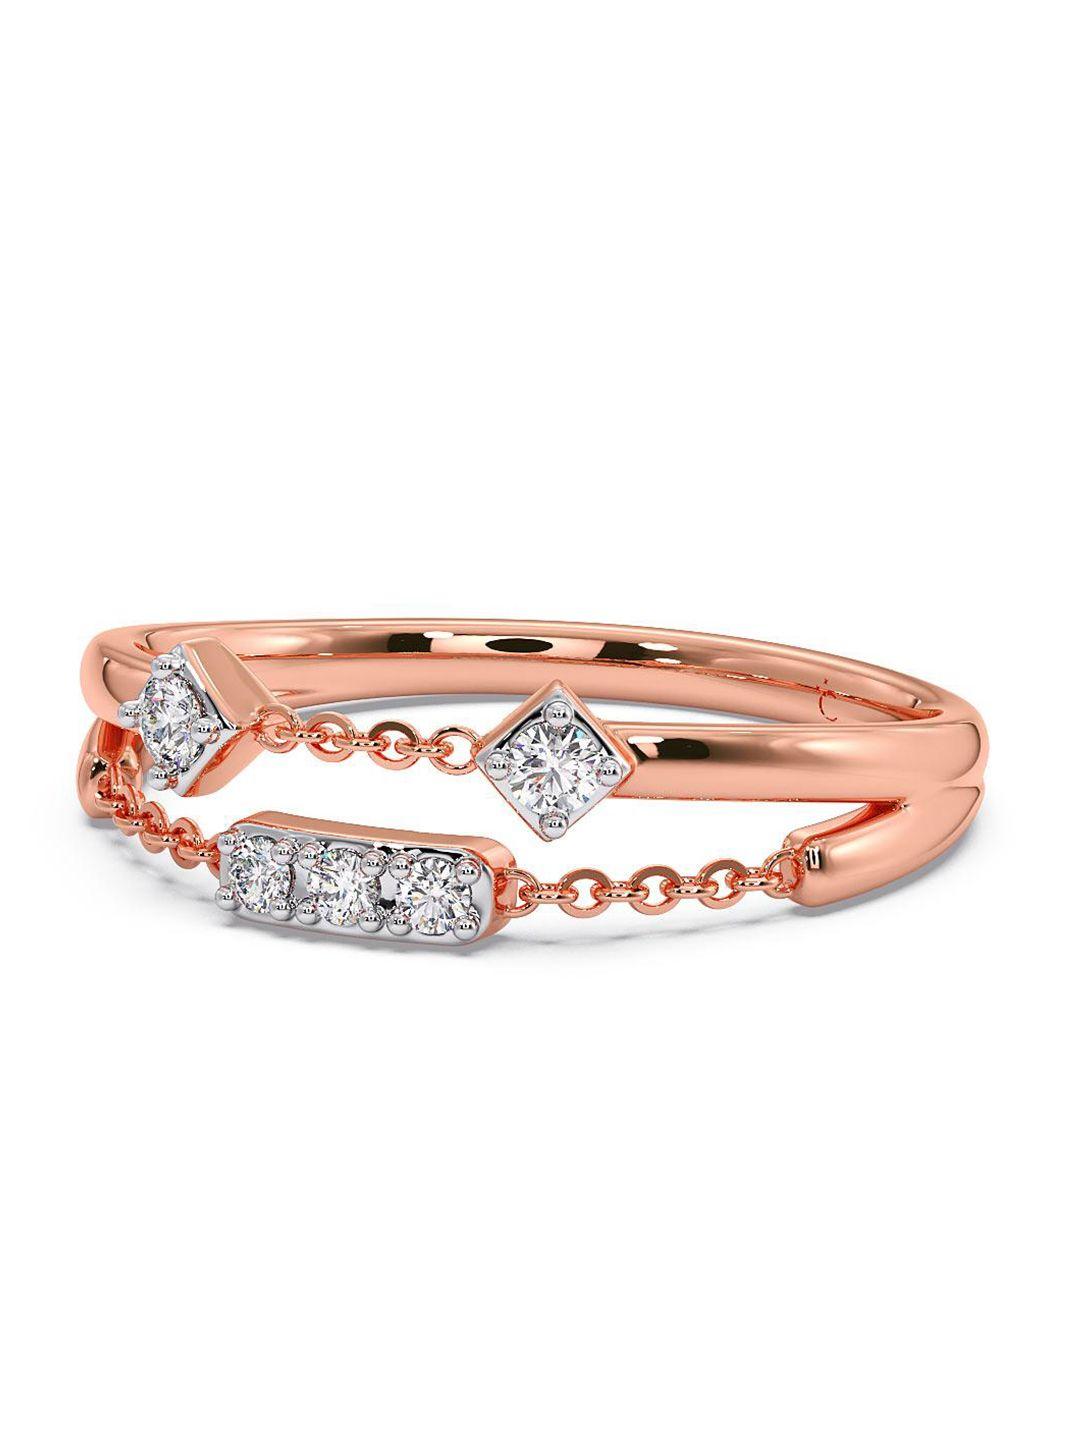 candere a kalyan jewellers company 14kt cz-studded rose gold ring- 2.49 gm